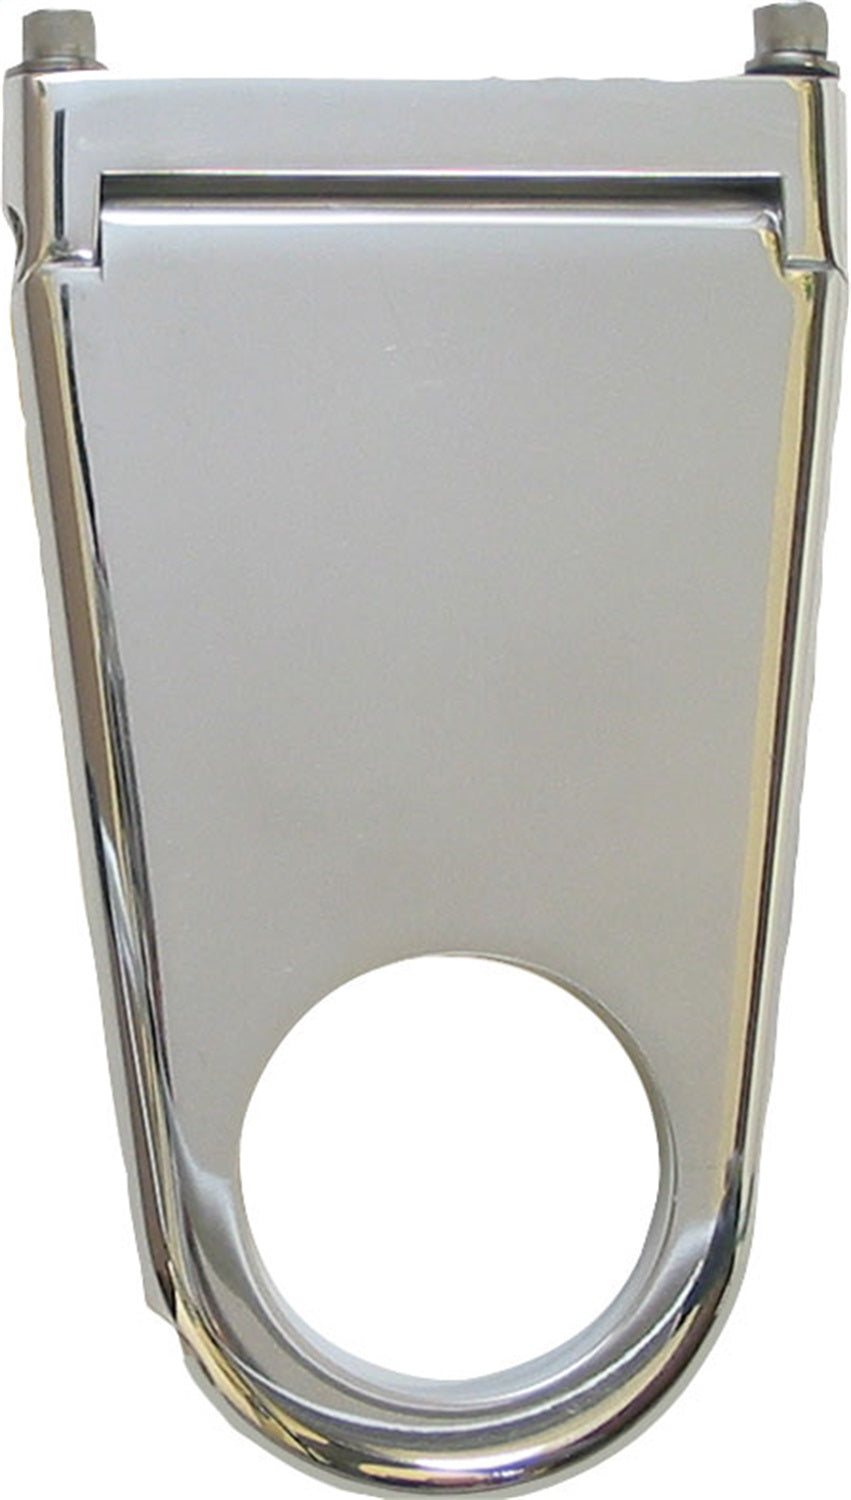 Borgeson Column Drop Blank Style 2-1/4in. Column X 7in. Drop Polished Aluminum 911227